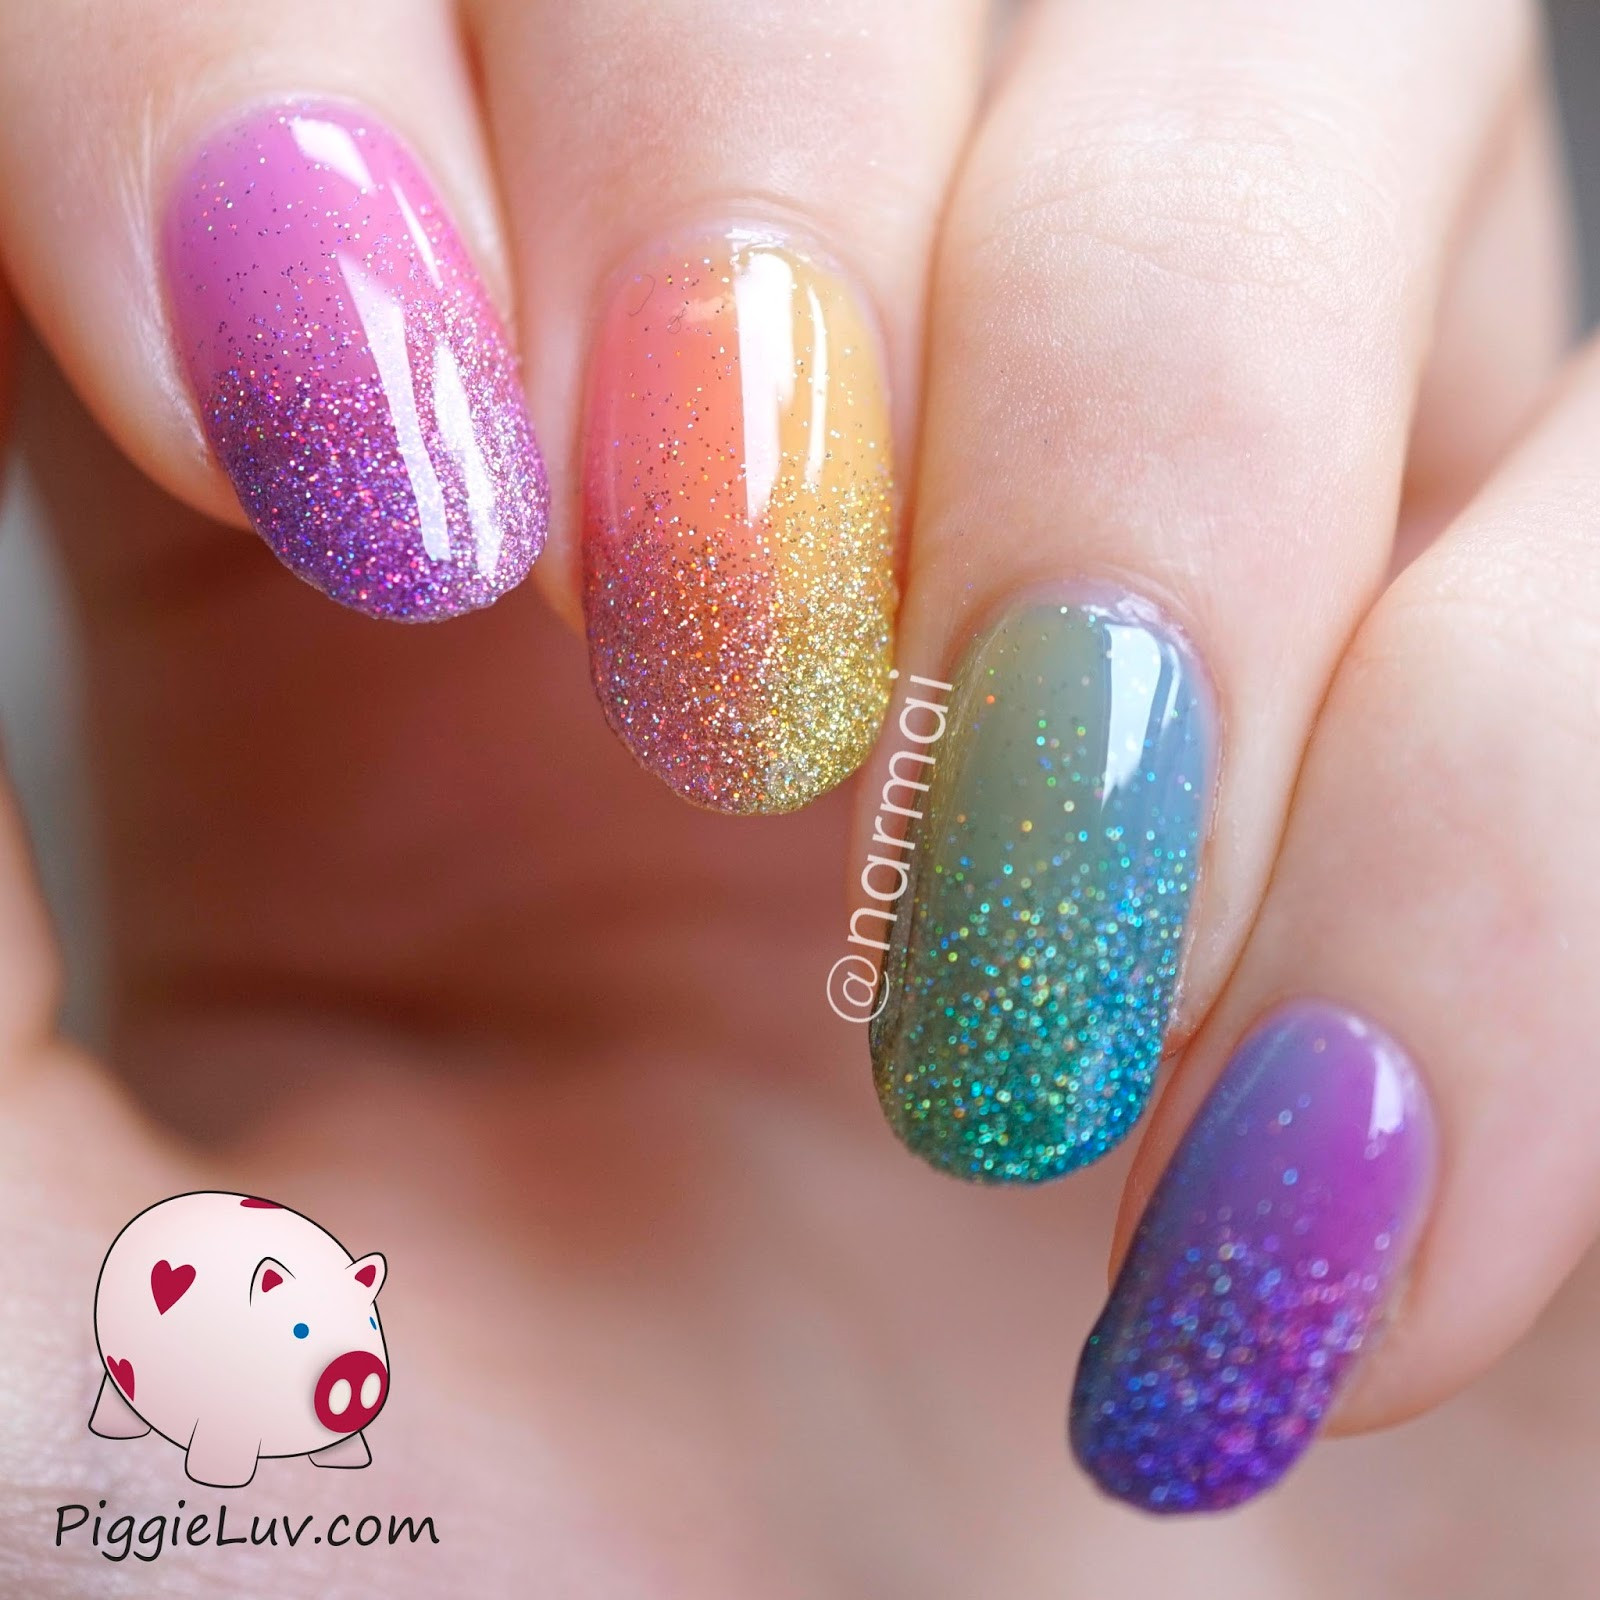 Glitter Gel Nail Designs
 15 Sparkly Nail Designs You Have To Try